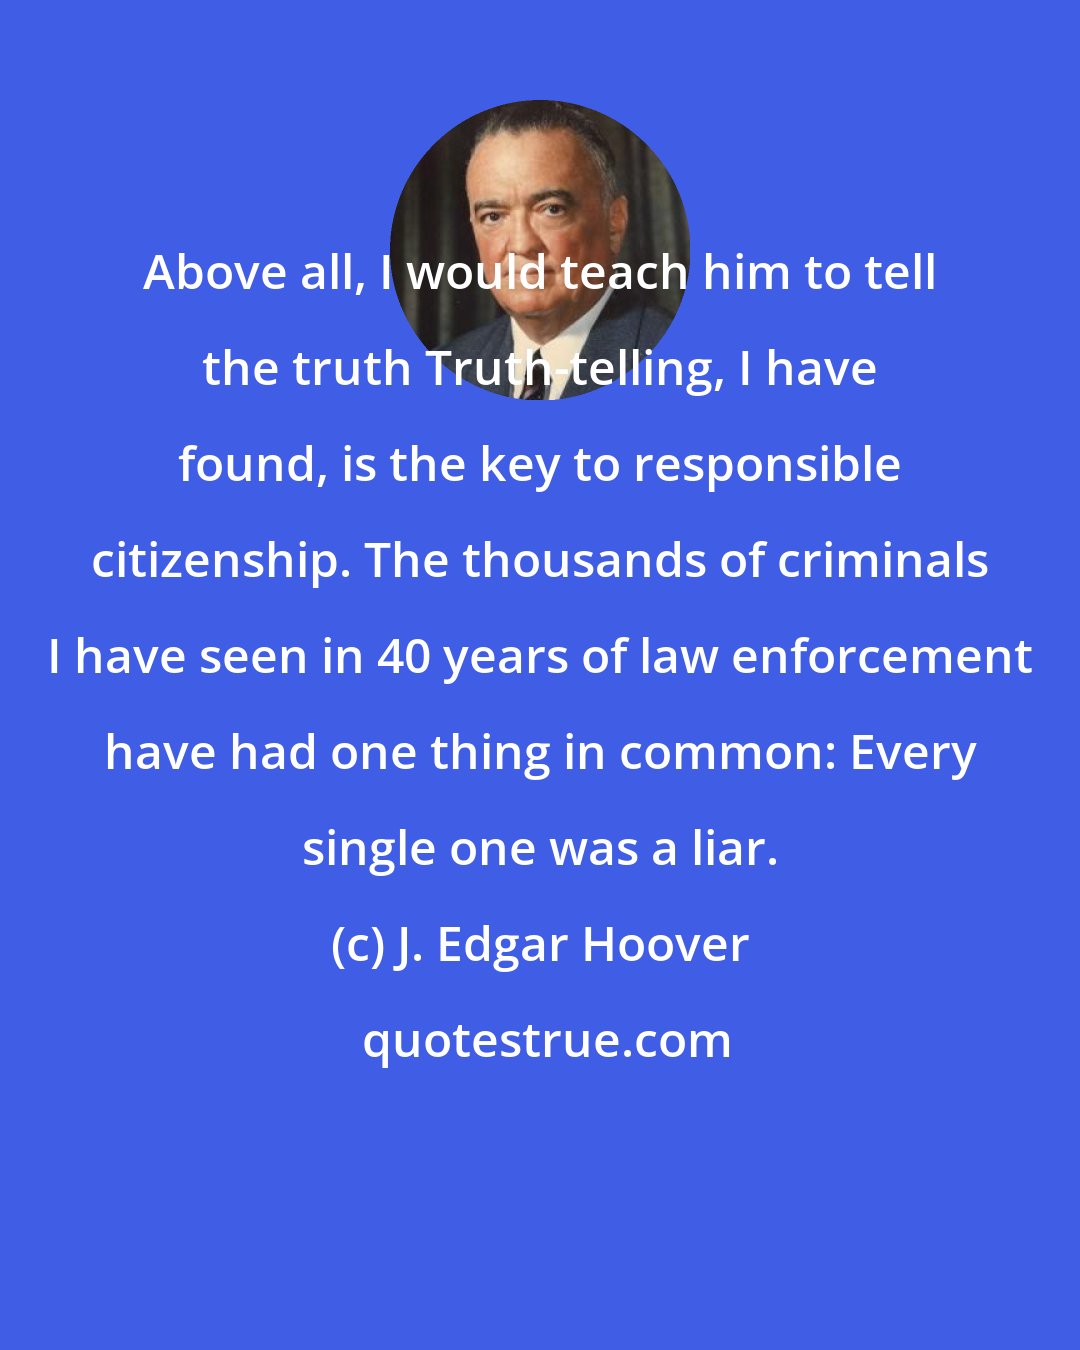 J. Edgar Hoover: Above all, I would teach him to tell the truth Truth-telling, I have found, is the key to responsible citizenship. The thousands of criminals I have seen in 40 years of law enforcement have had one thing in common: Every single one was a liar.